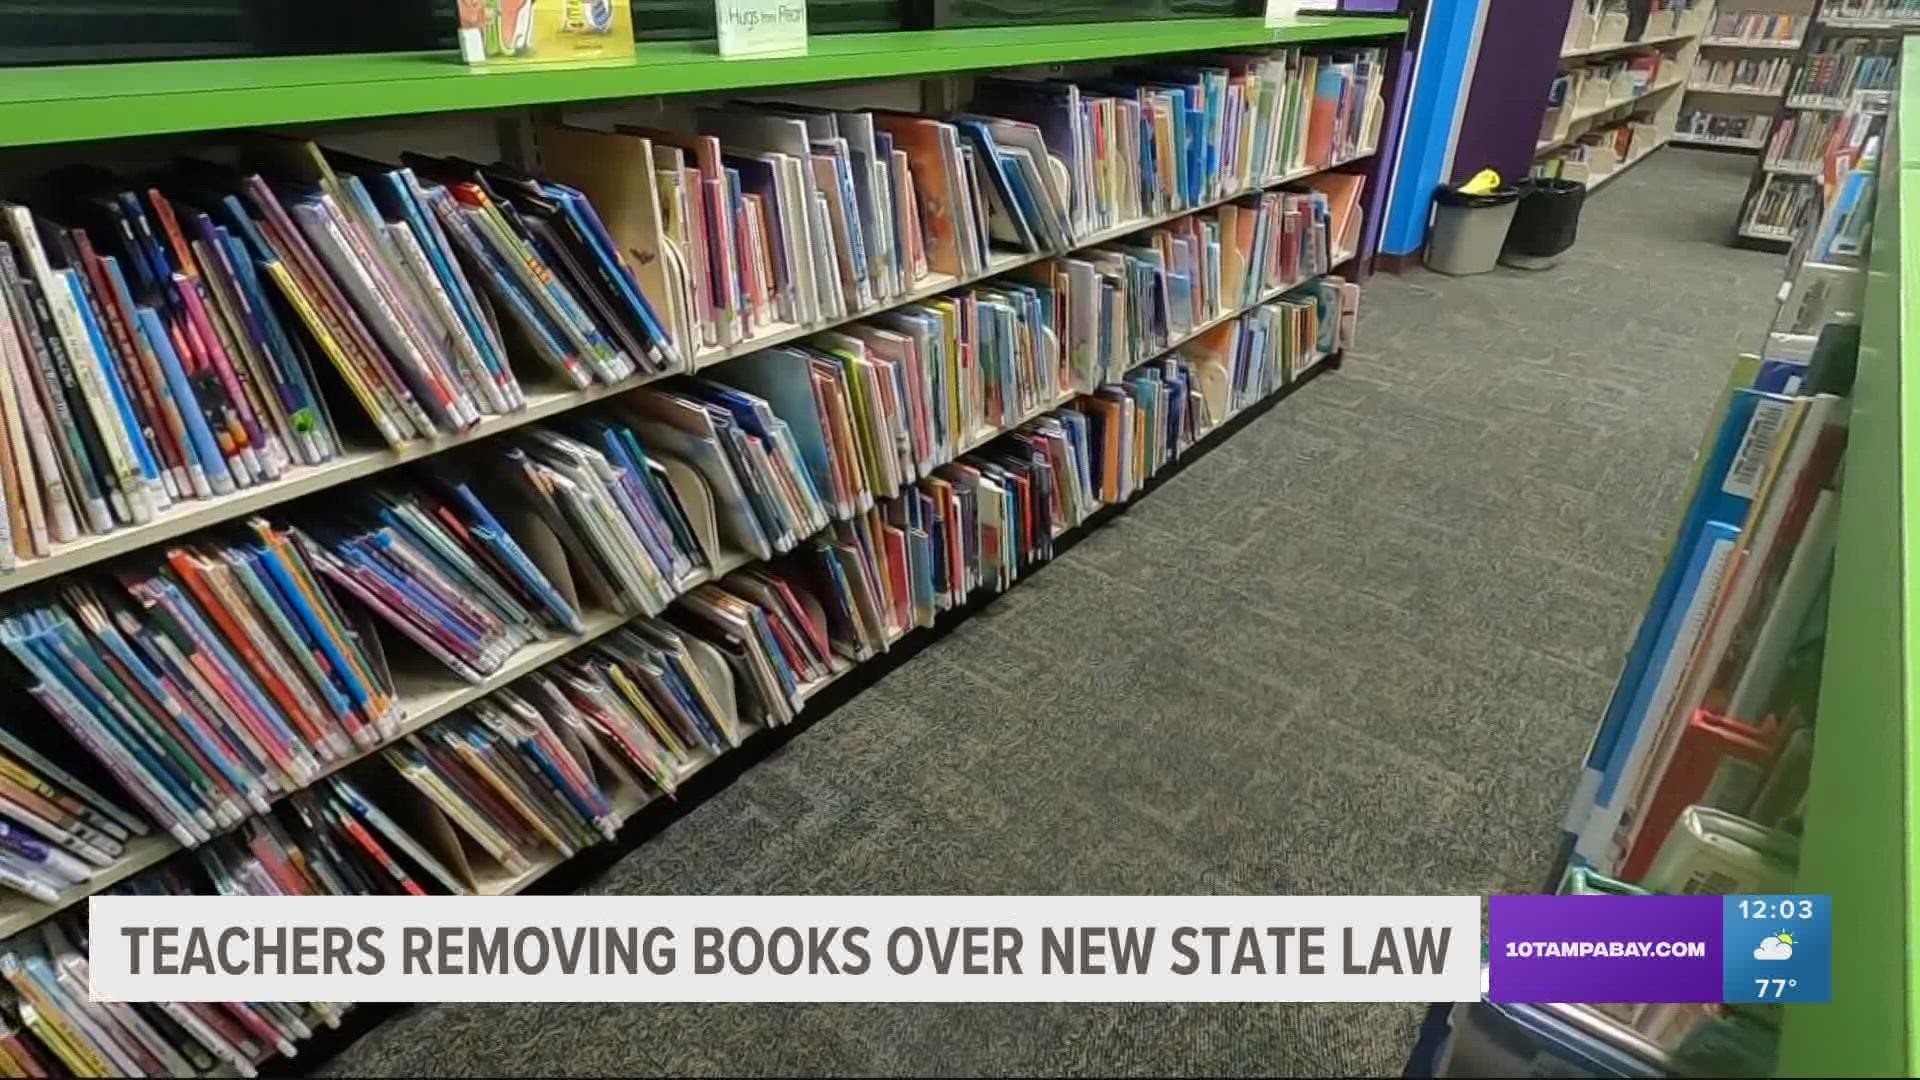 All districts now need to go though and develop a process to review teachers' classroom libraries.
If books aren't in compliance teachers could face a third-degree